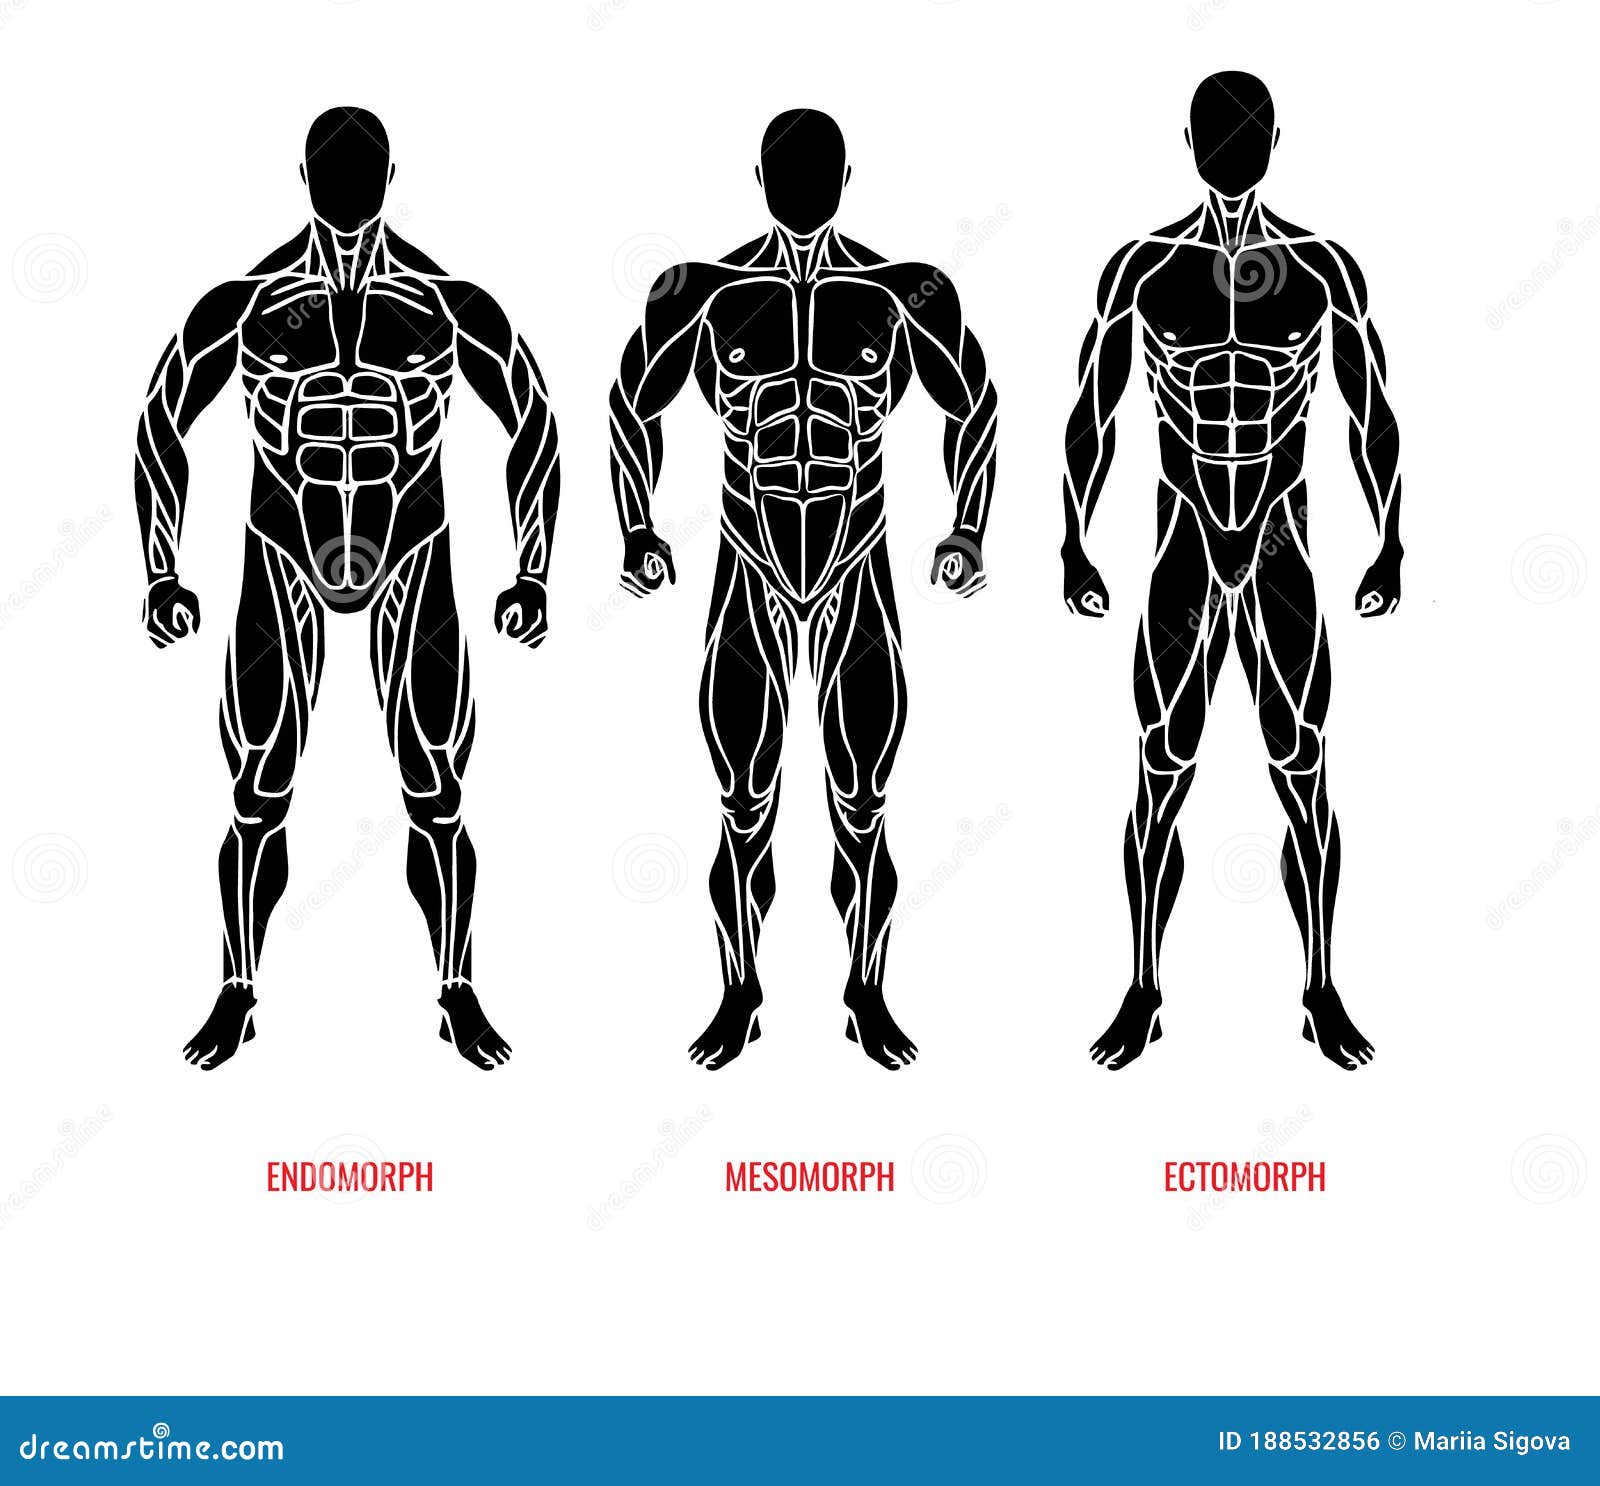 A 3D Illustration Of A Male Body Showcasing Three Different Body Types -  Ectomorph, Mesomorph, And Endomorph, Highlighting The Unique  Characteristics Of Each Body Type. Stock Photo, Picture and Royalty Free  Image.